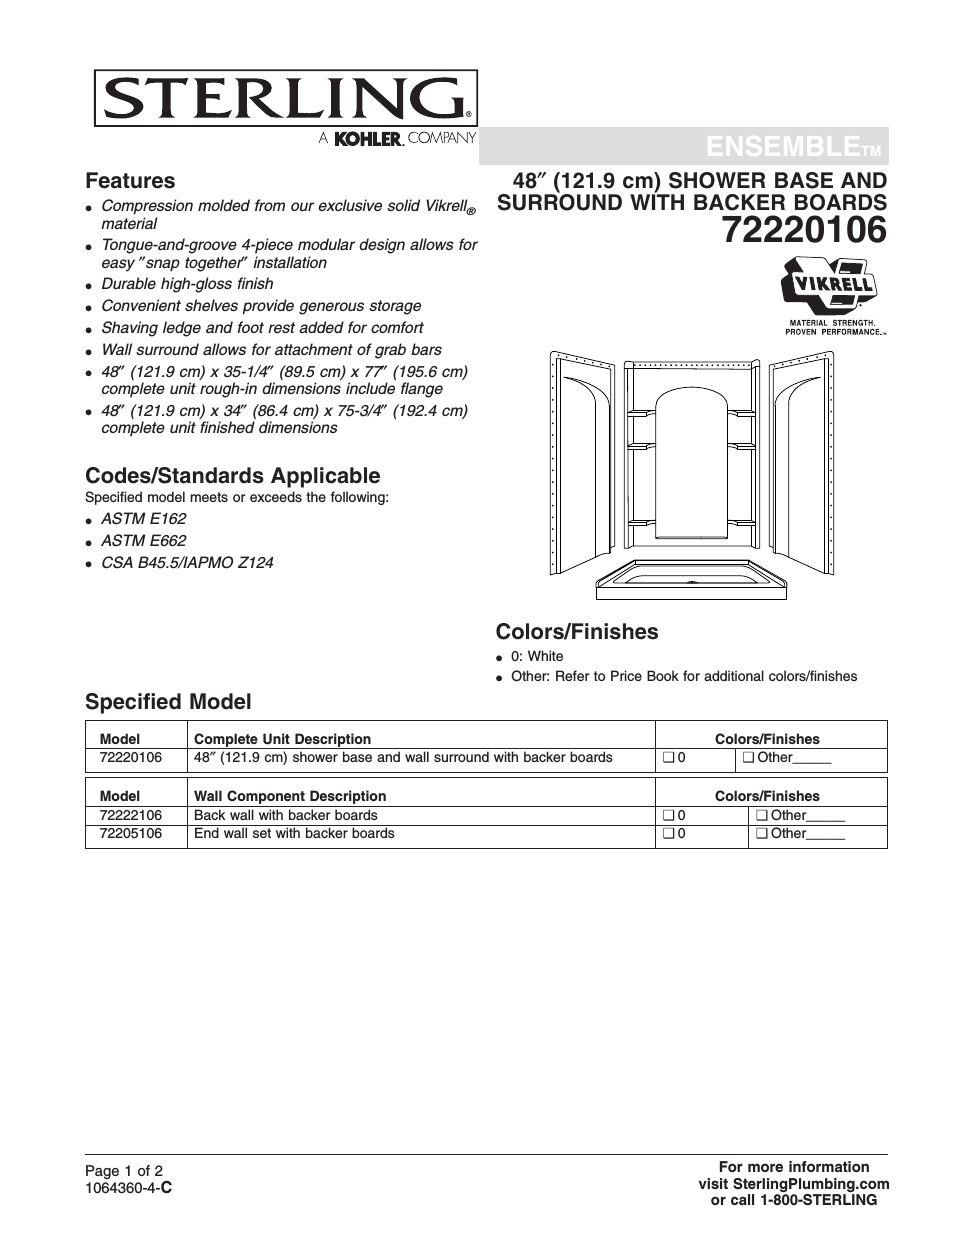 Shower Receptor and Wall Surround with Backer Boards 72220106